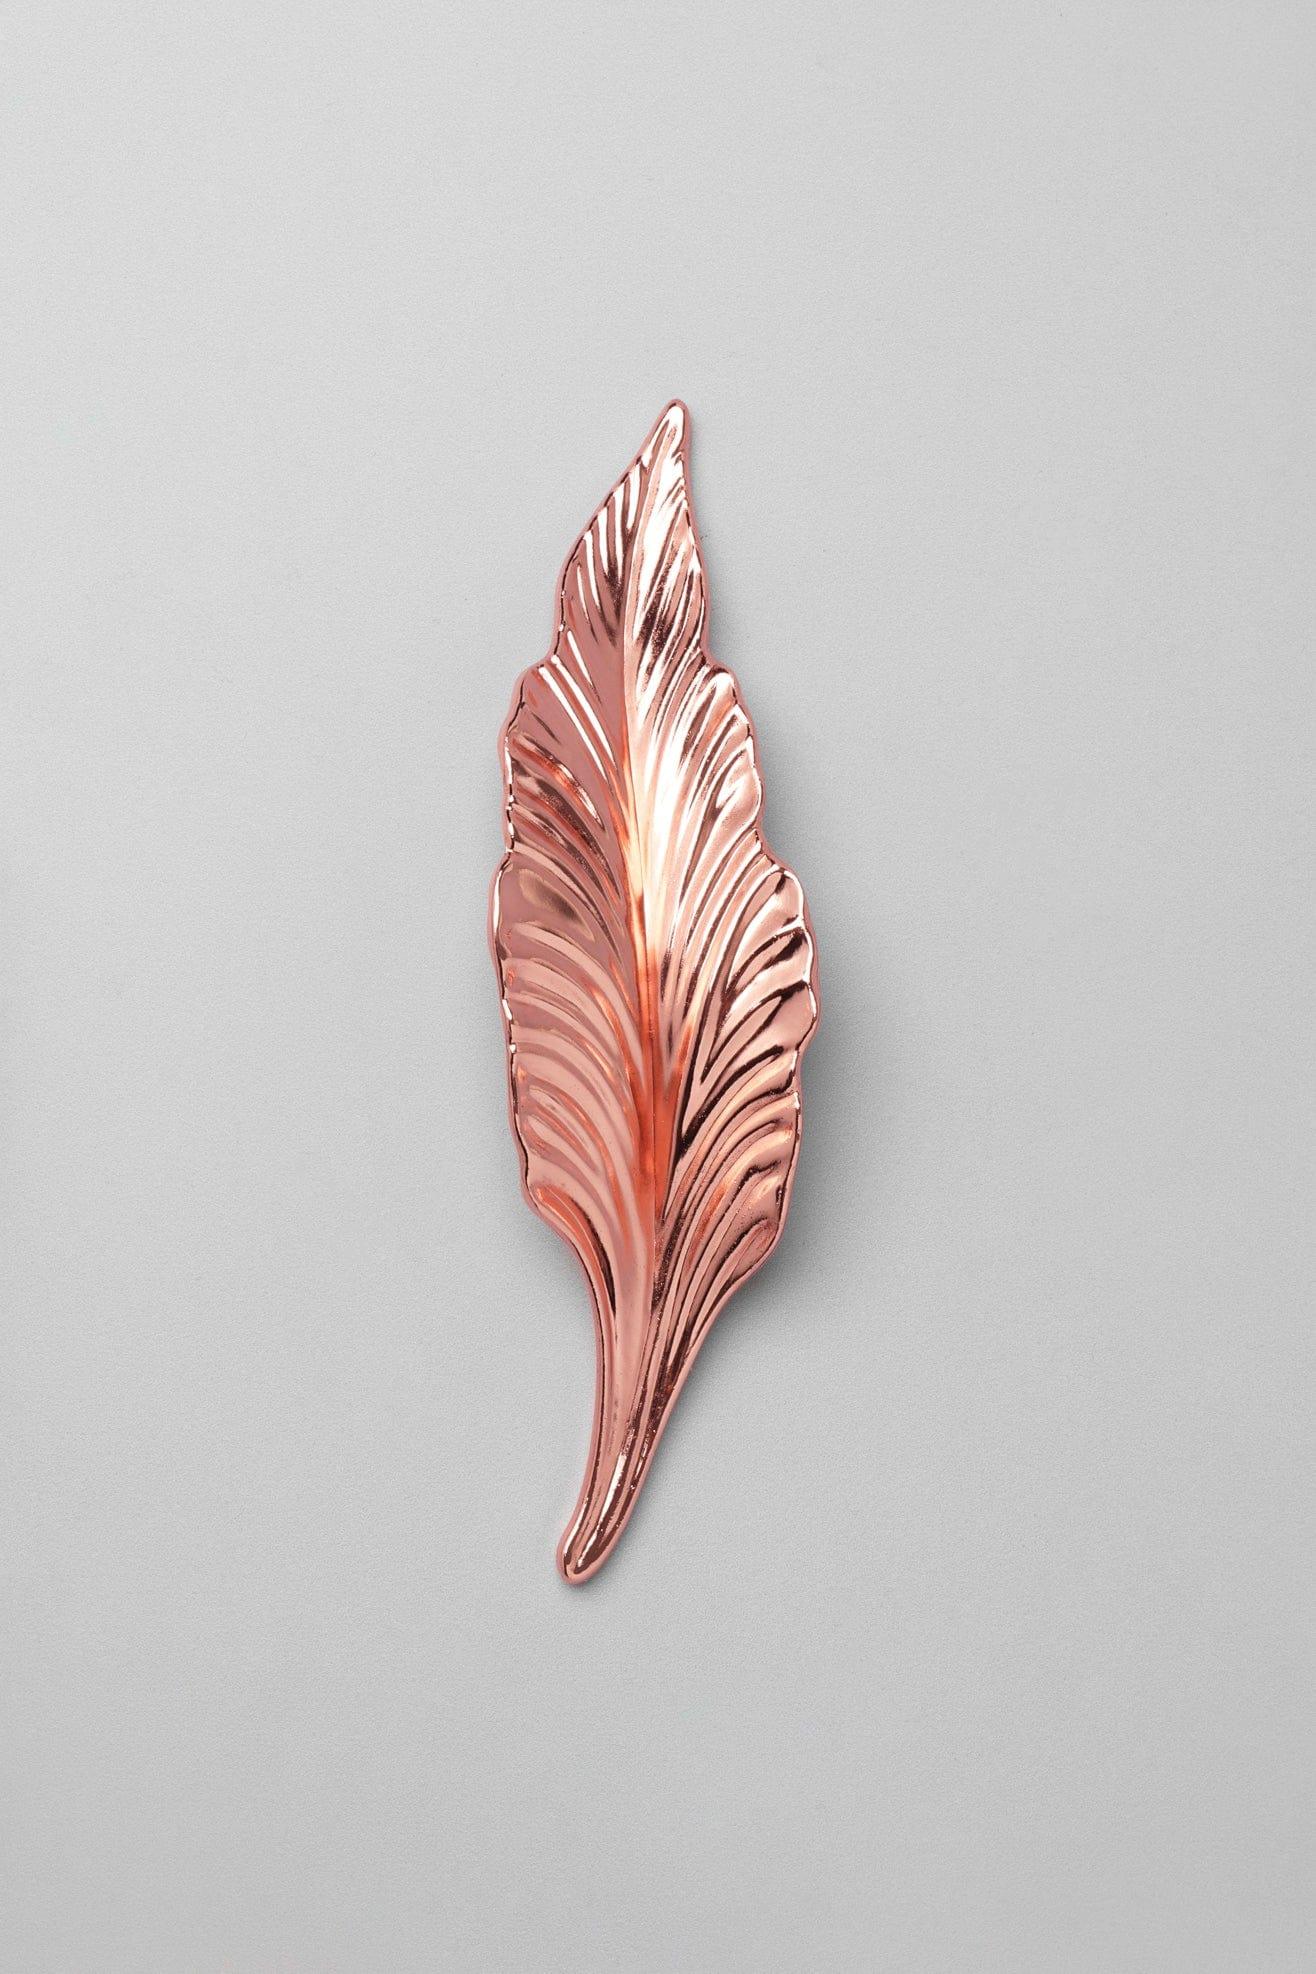 G Decor Rose Gold Leaves Cupboard Pull Draw Handle